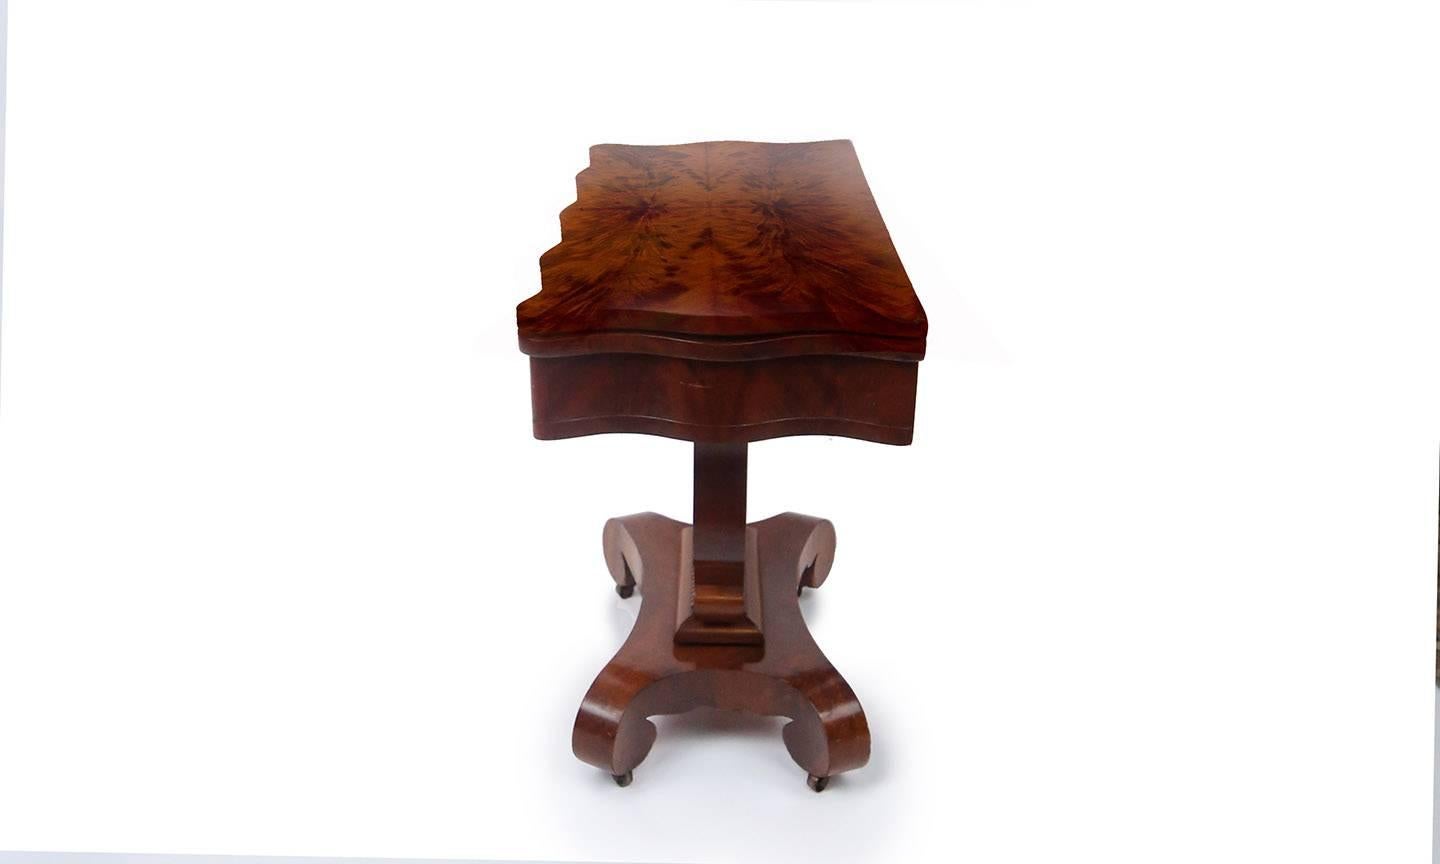 Handsome Empire card or tea table with centre pedestal in mahogany and matchbook flame mahogany. Hinged top opens to reveal compartment and pivots to become square table. Scalloped edge top and frieze supported by bold harp base and scroll legs with